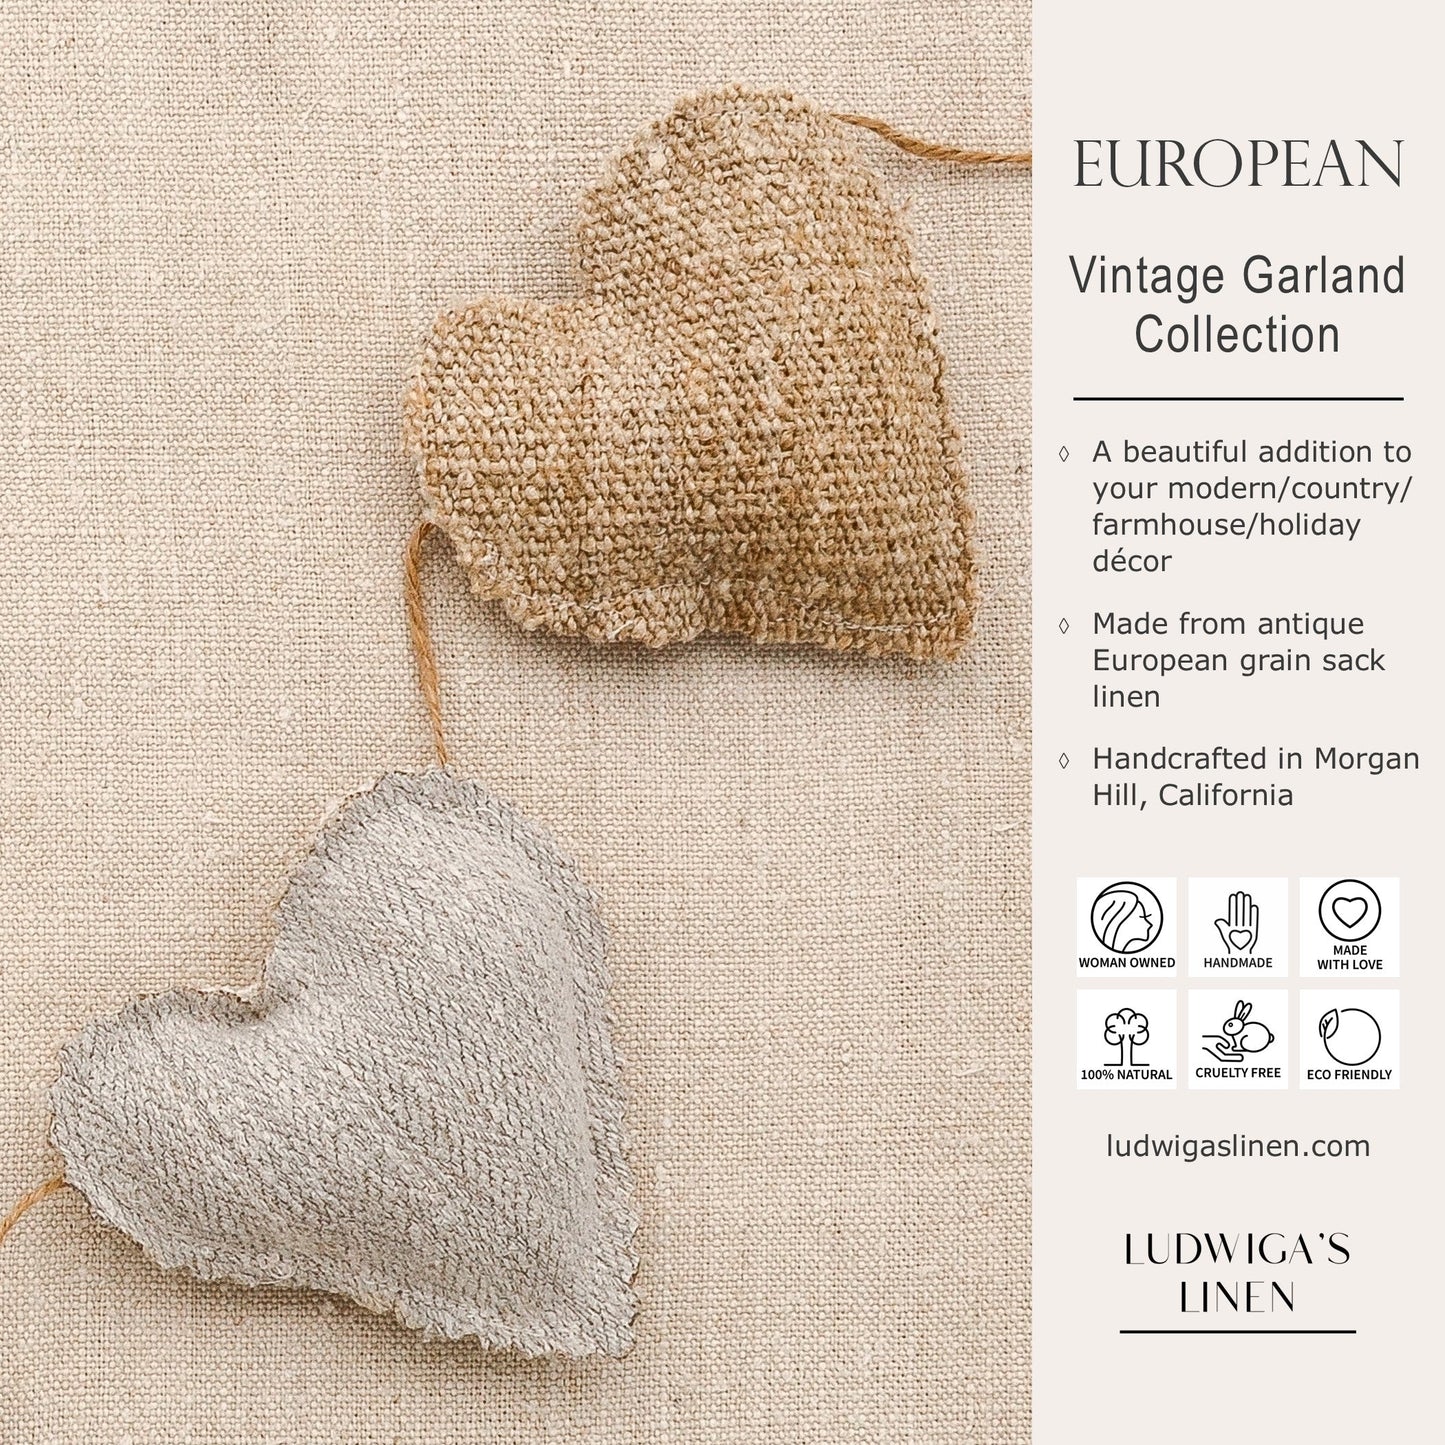 Focus on two hearts in this vintage European grain linern sack garland on white cotton or hemp twine